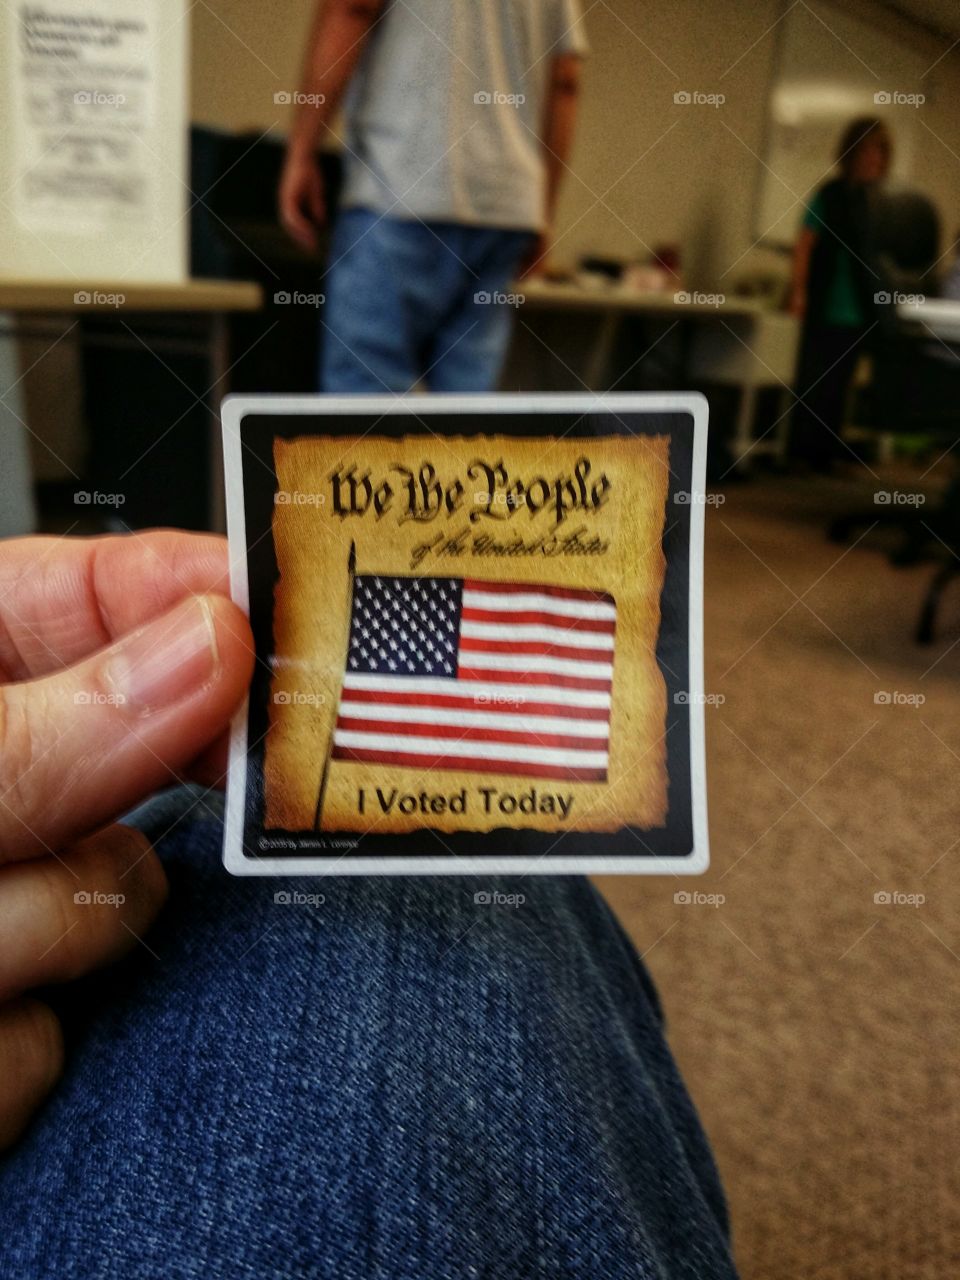 We the People sticker early voting American flag people hand holding proud patriotic duty